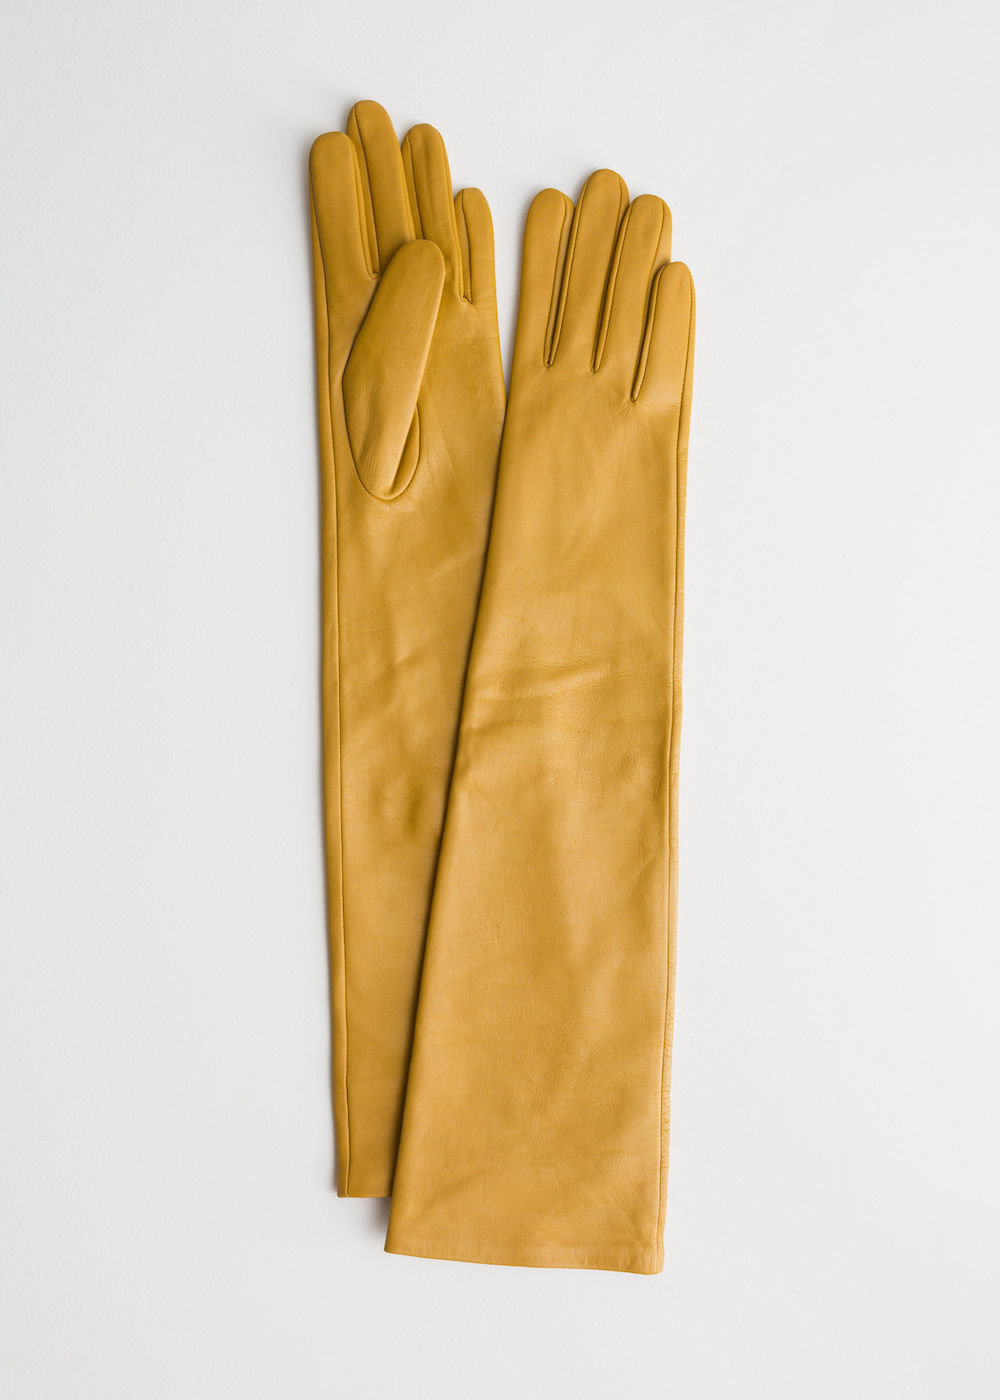 Stylish Gloves to Keep Your Hands Warm and On Trend - theFashionSpot